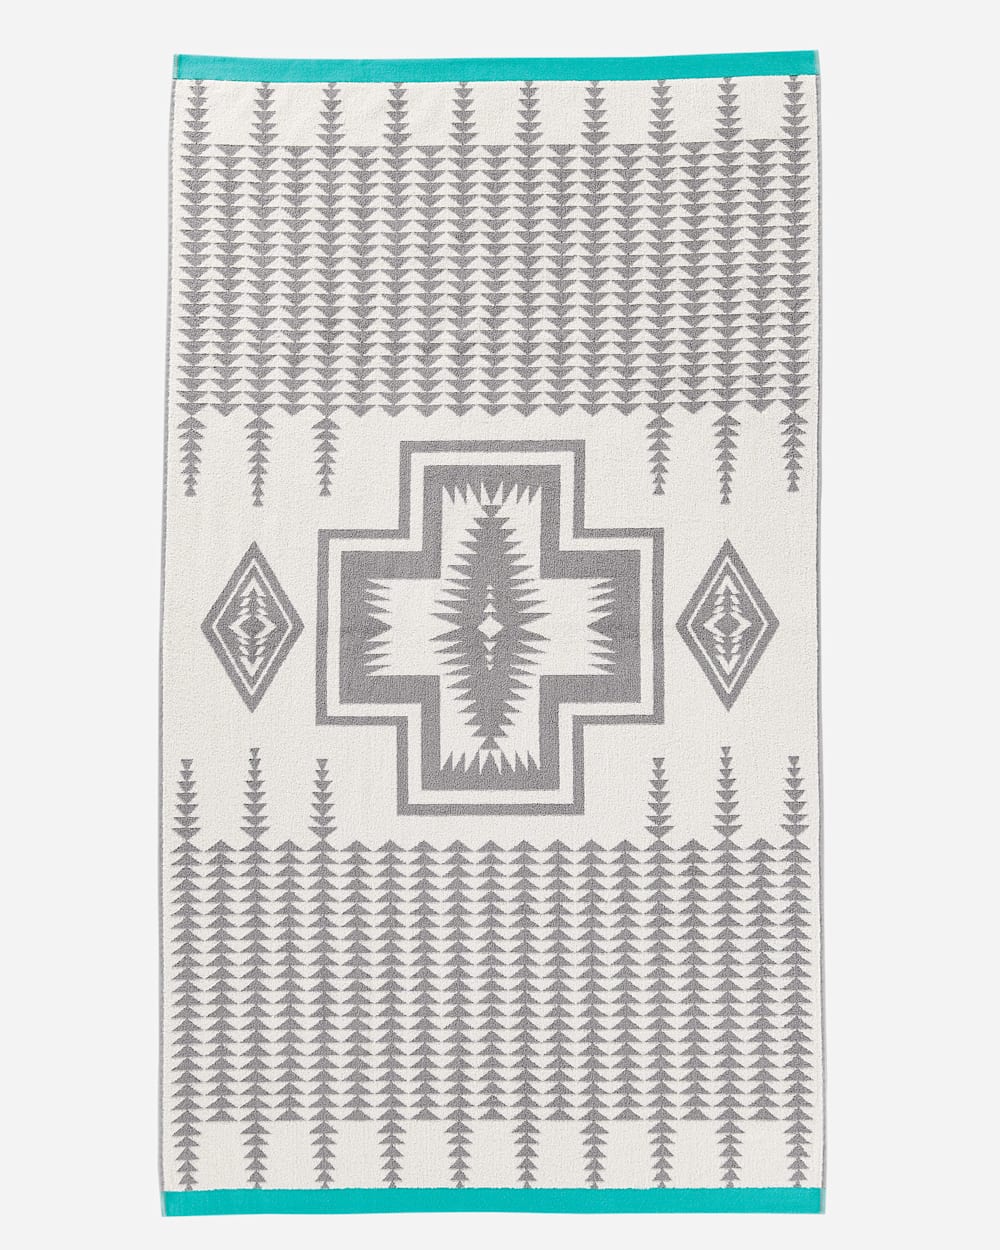 ADDITIONAL VIEW OF HARDING JACQUARD SPA TOWEL IN GREY image number 2